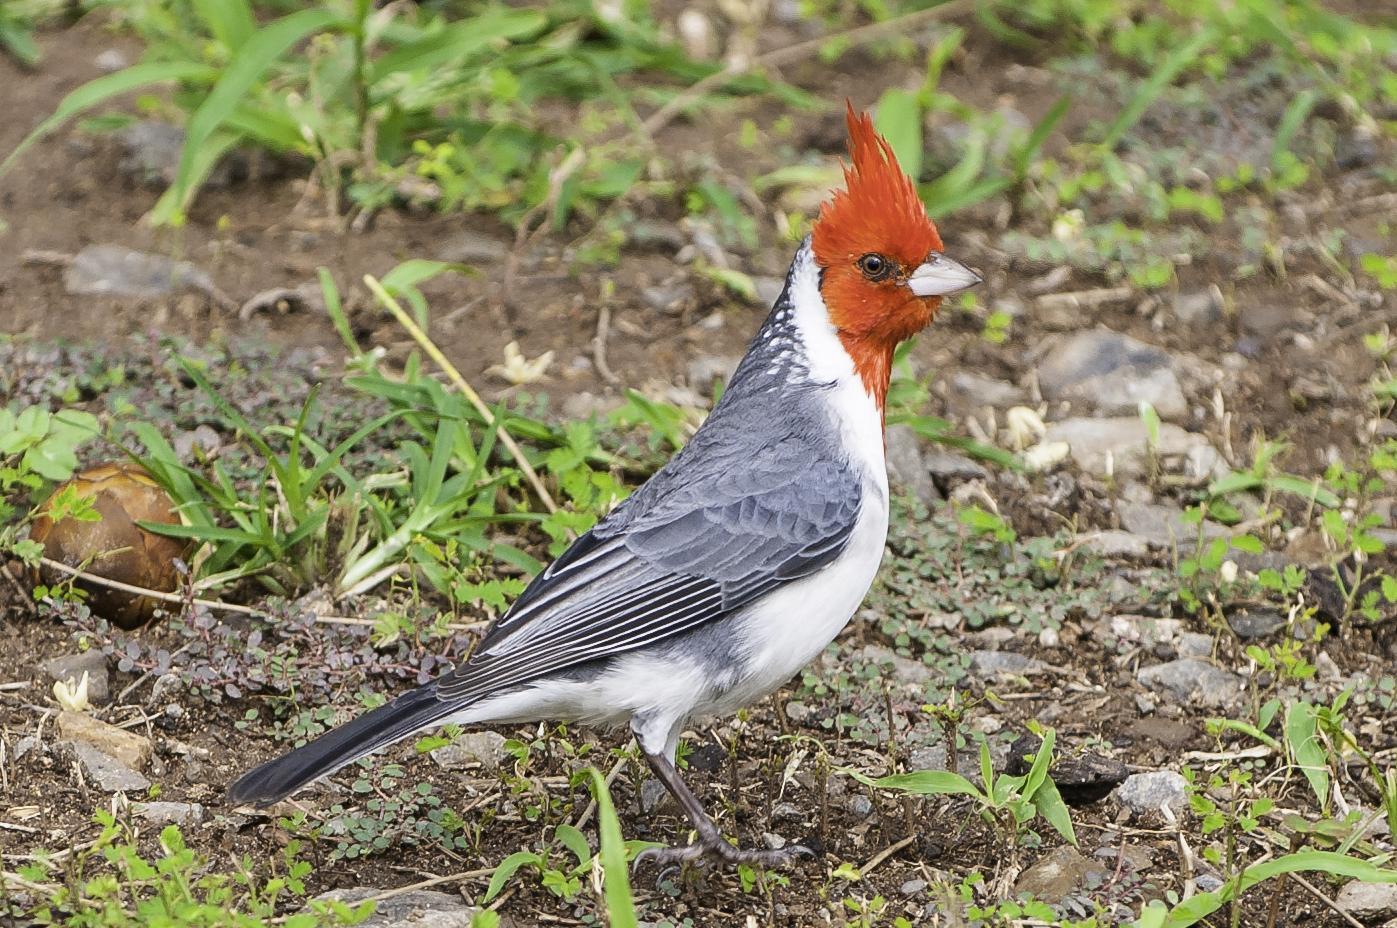 Red-crested Cardinal Photo by Mason Rose